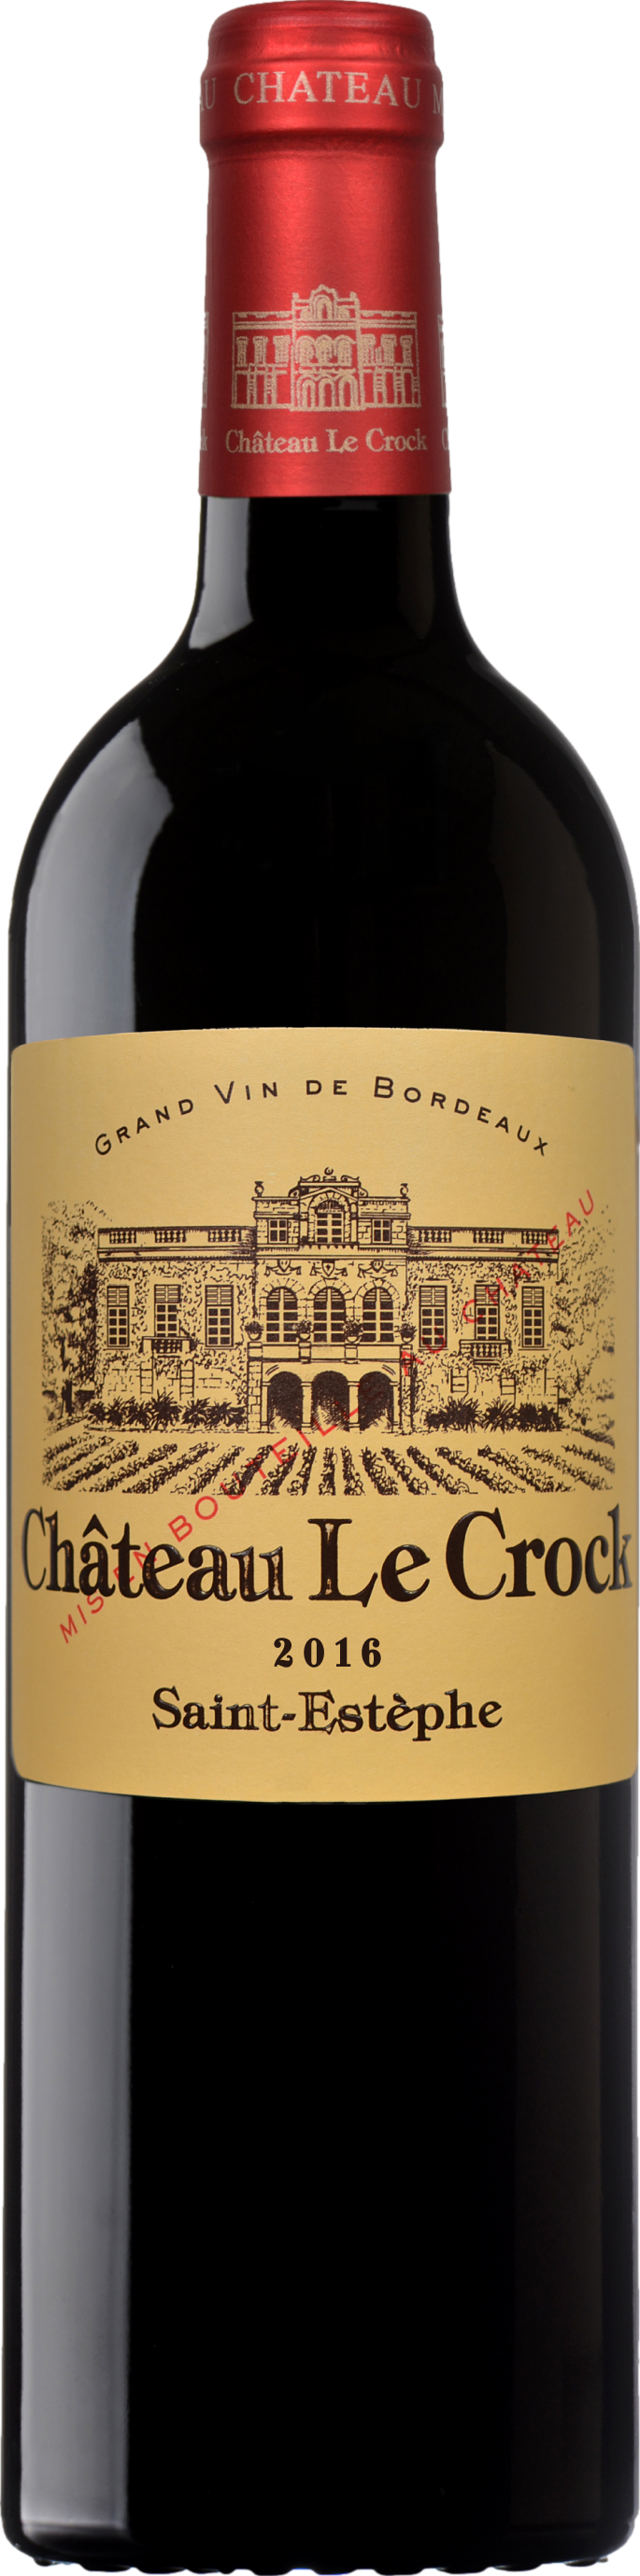 Chateau Leoville Poyferre Chateau Le Crock 2016 Cuvelier Family 8wines DACH